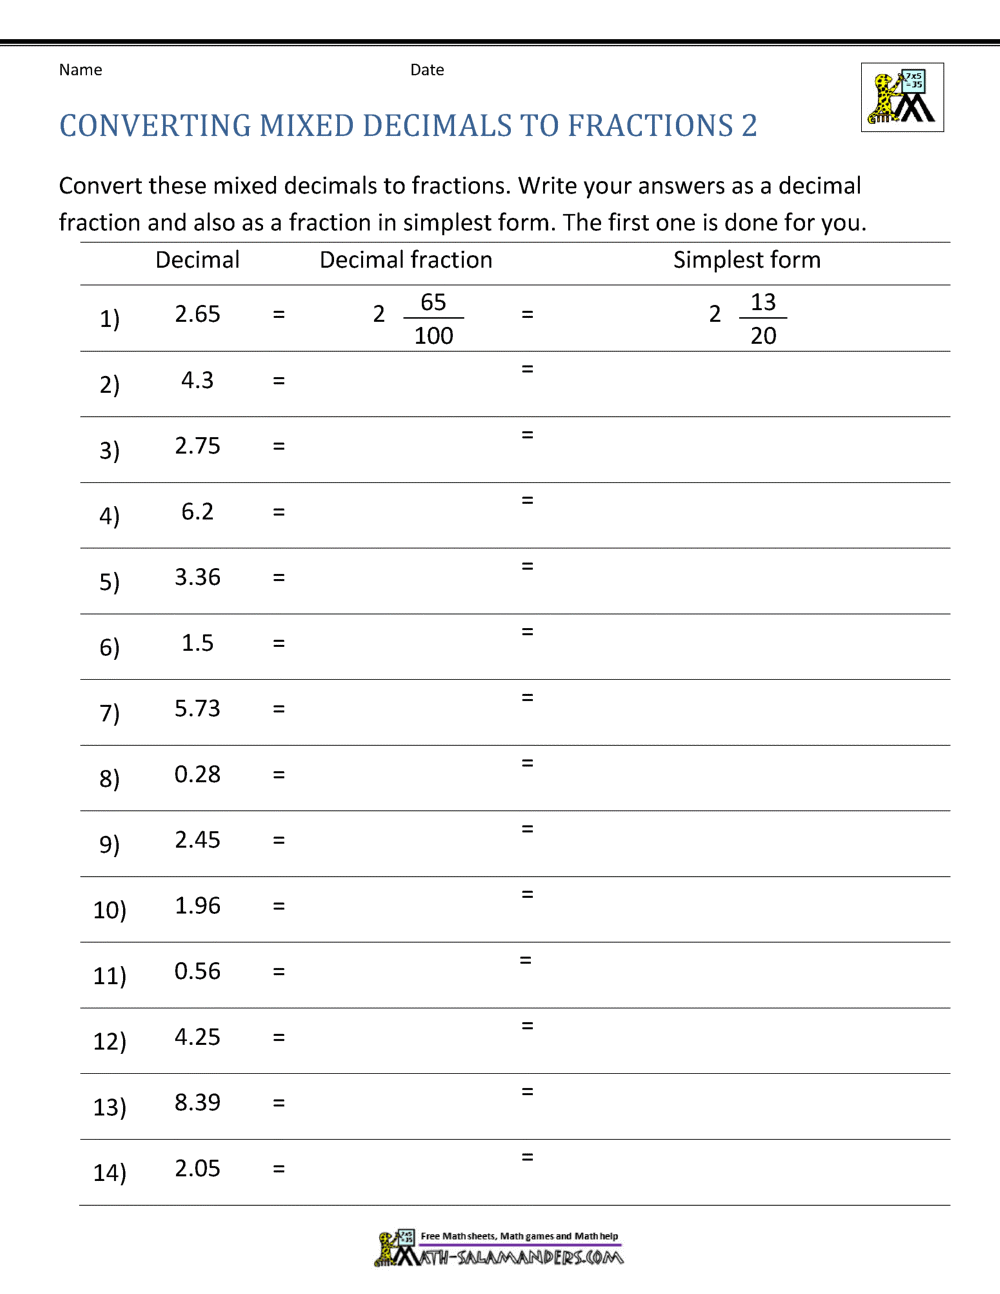 Converting Decimals to Fractions Worksheet For Repeating Decimal To Fraction Worksheet